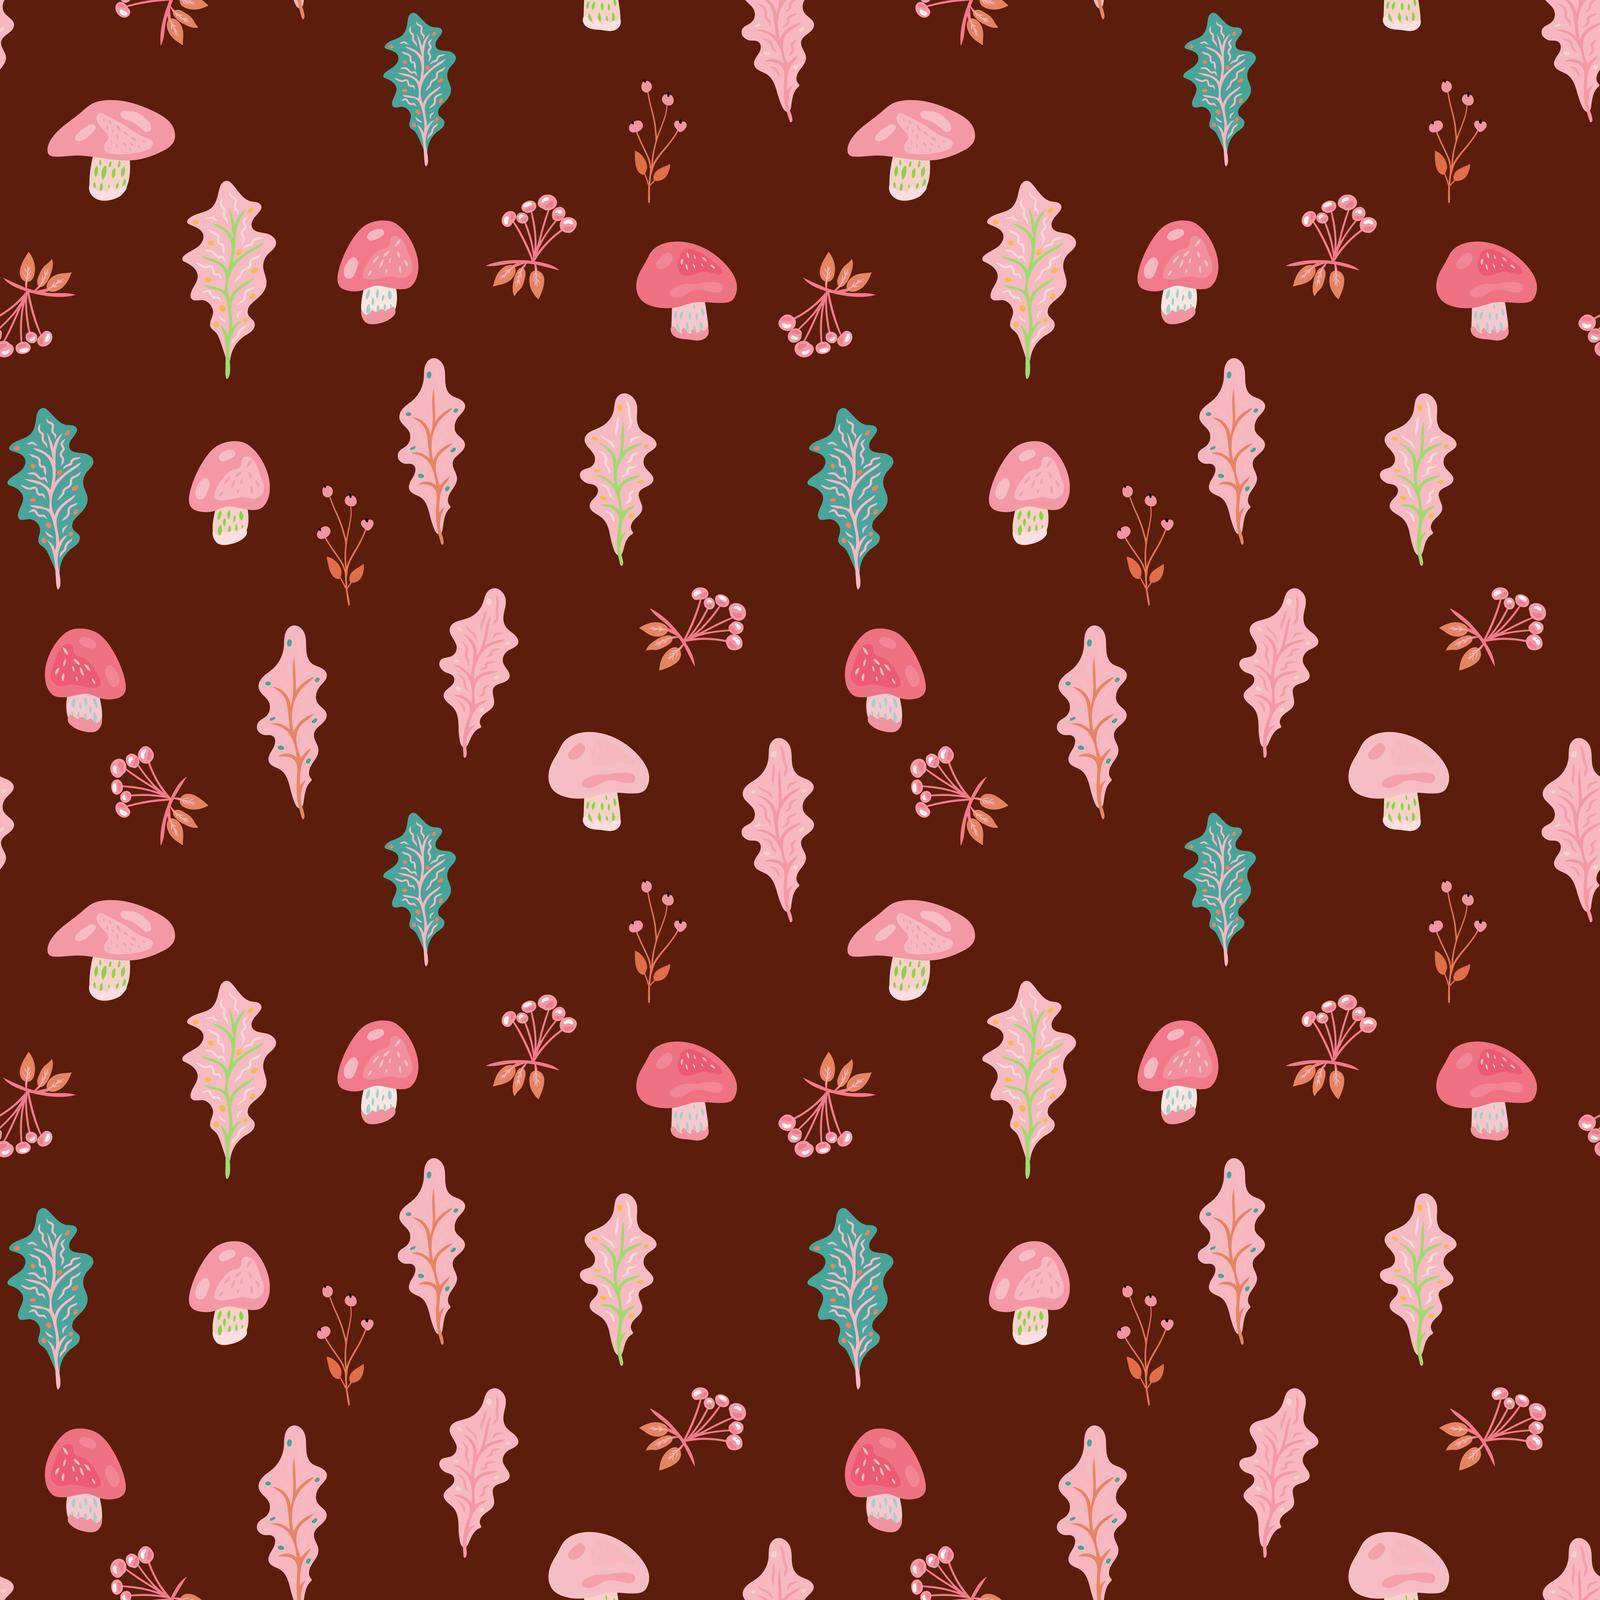 Seamless vector pattern in autumn colors with mushrooms, leaves, etc. Wallpaper, scrapbooking, textie and other surface design.